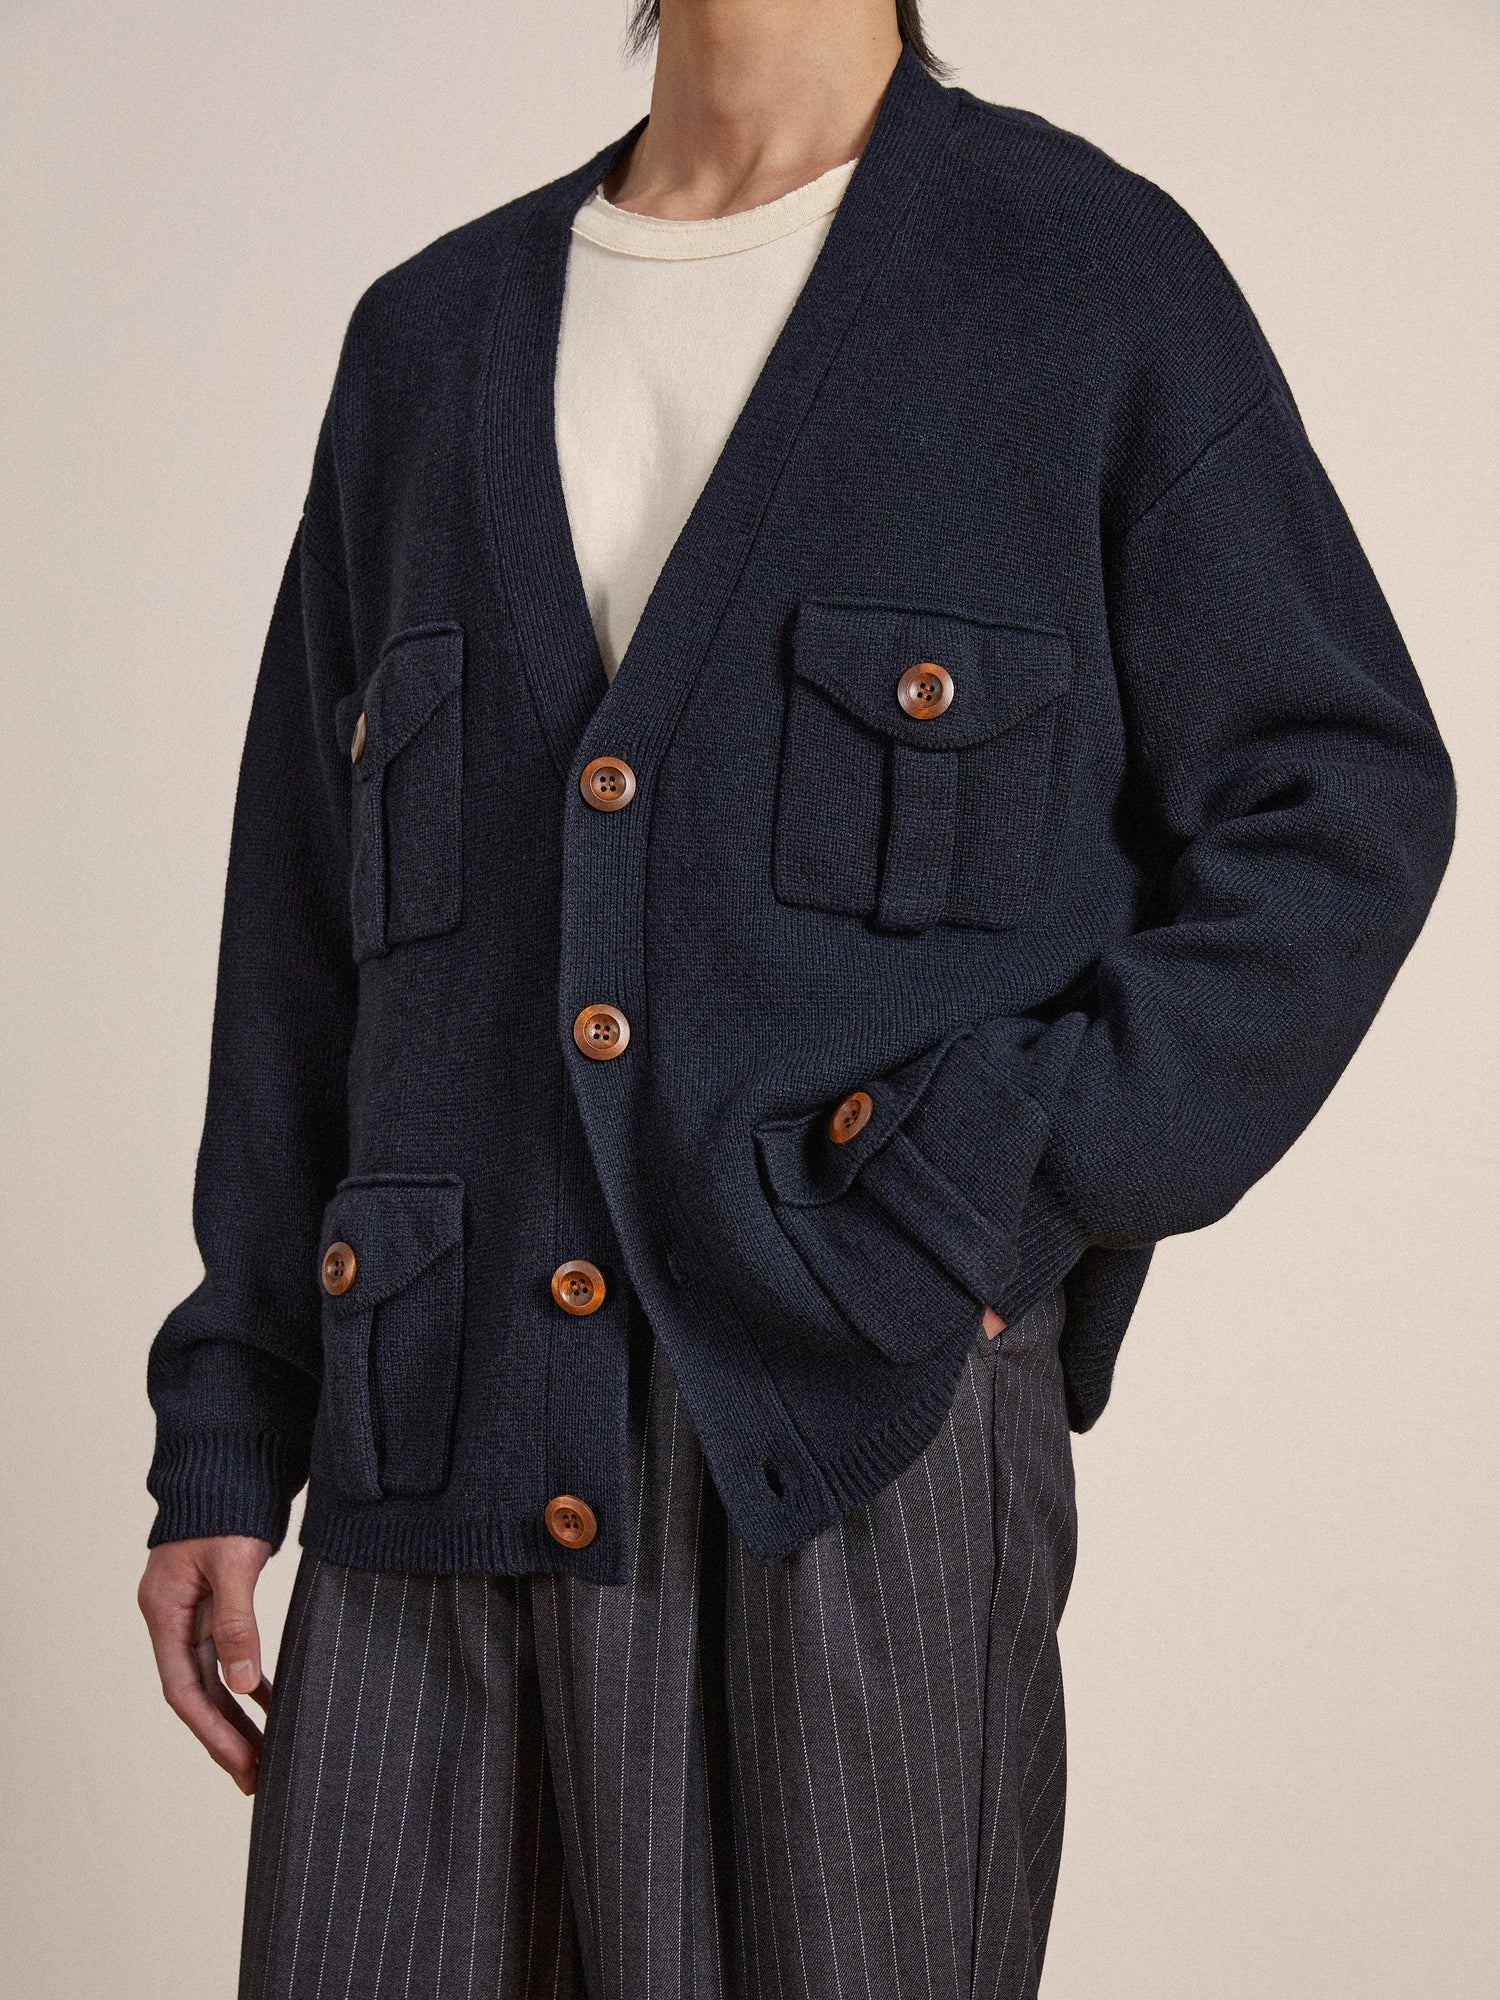 The model is wearing a navy Found Multi Pocket Cardigan with wooden buttons.